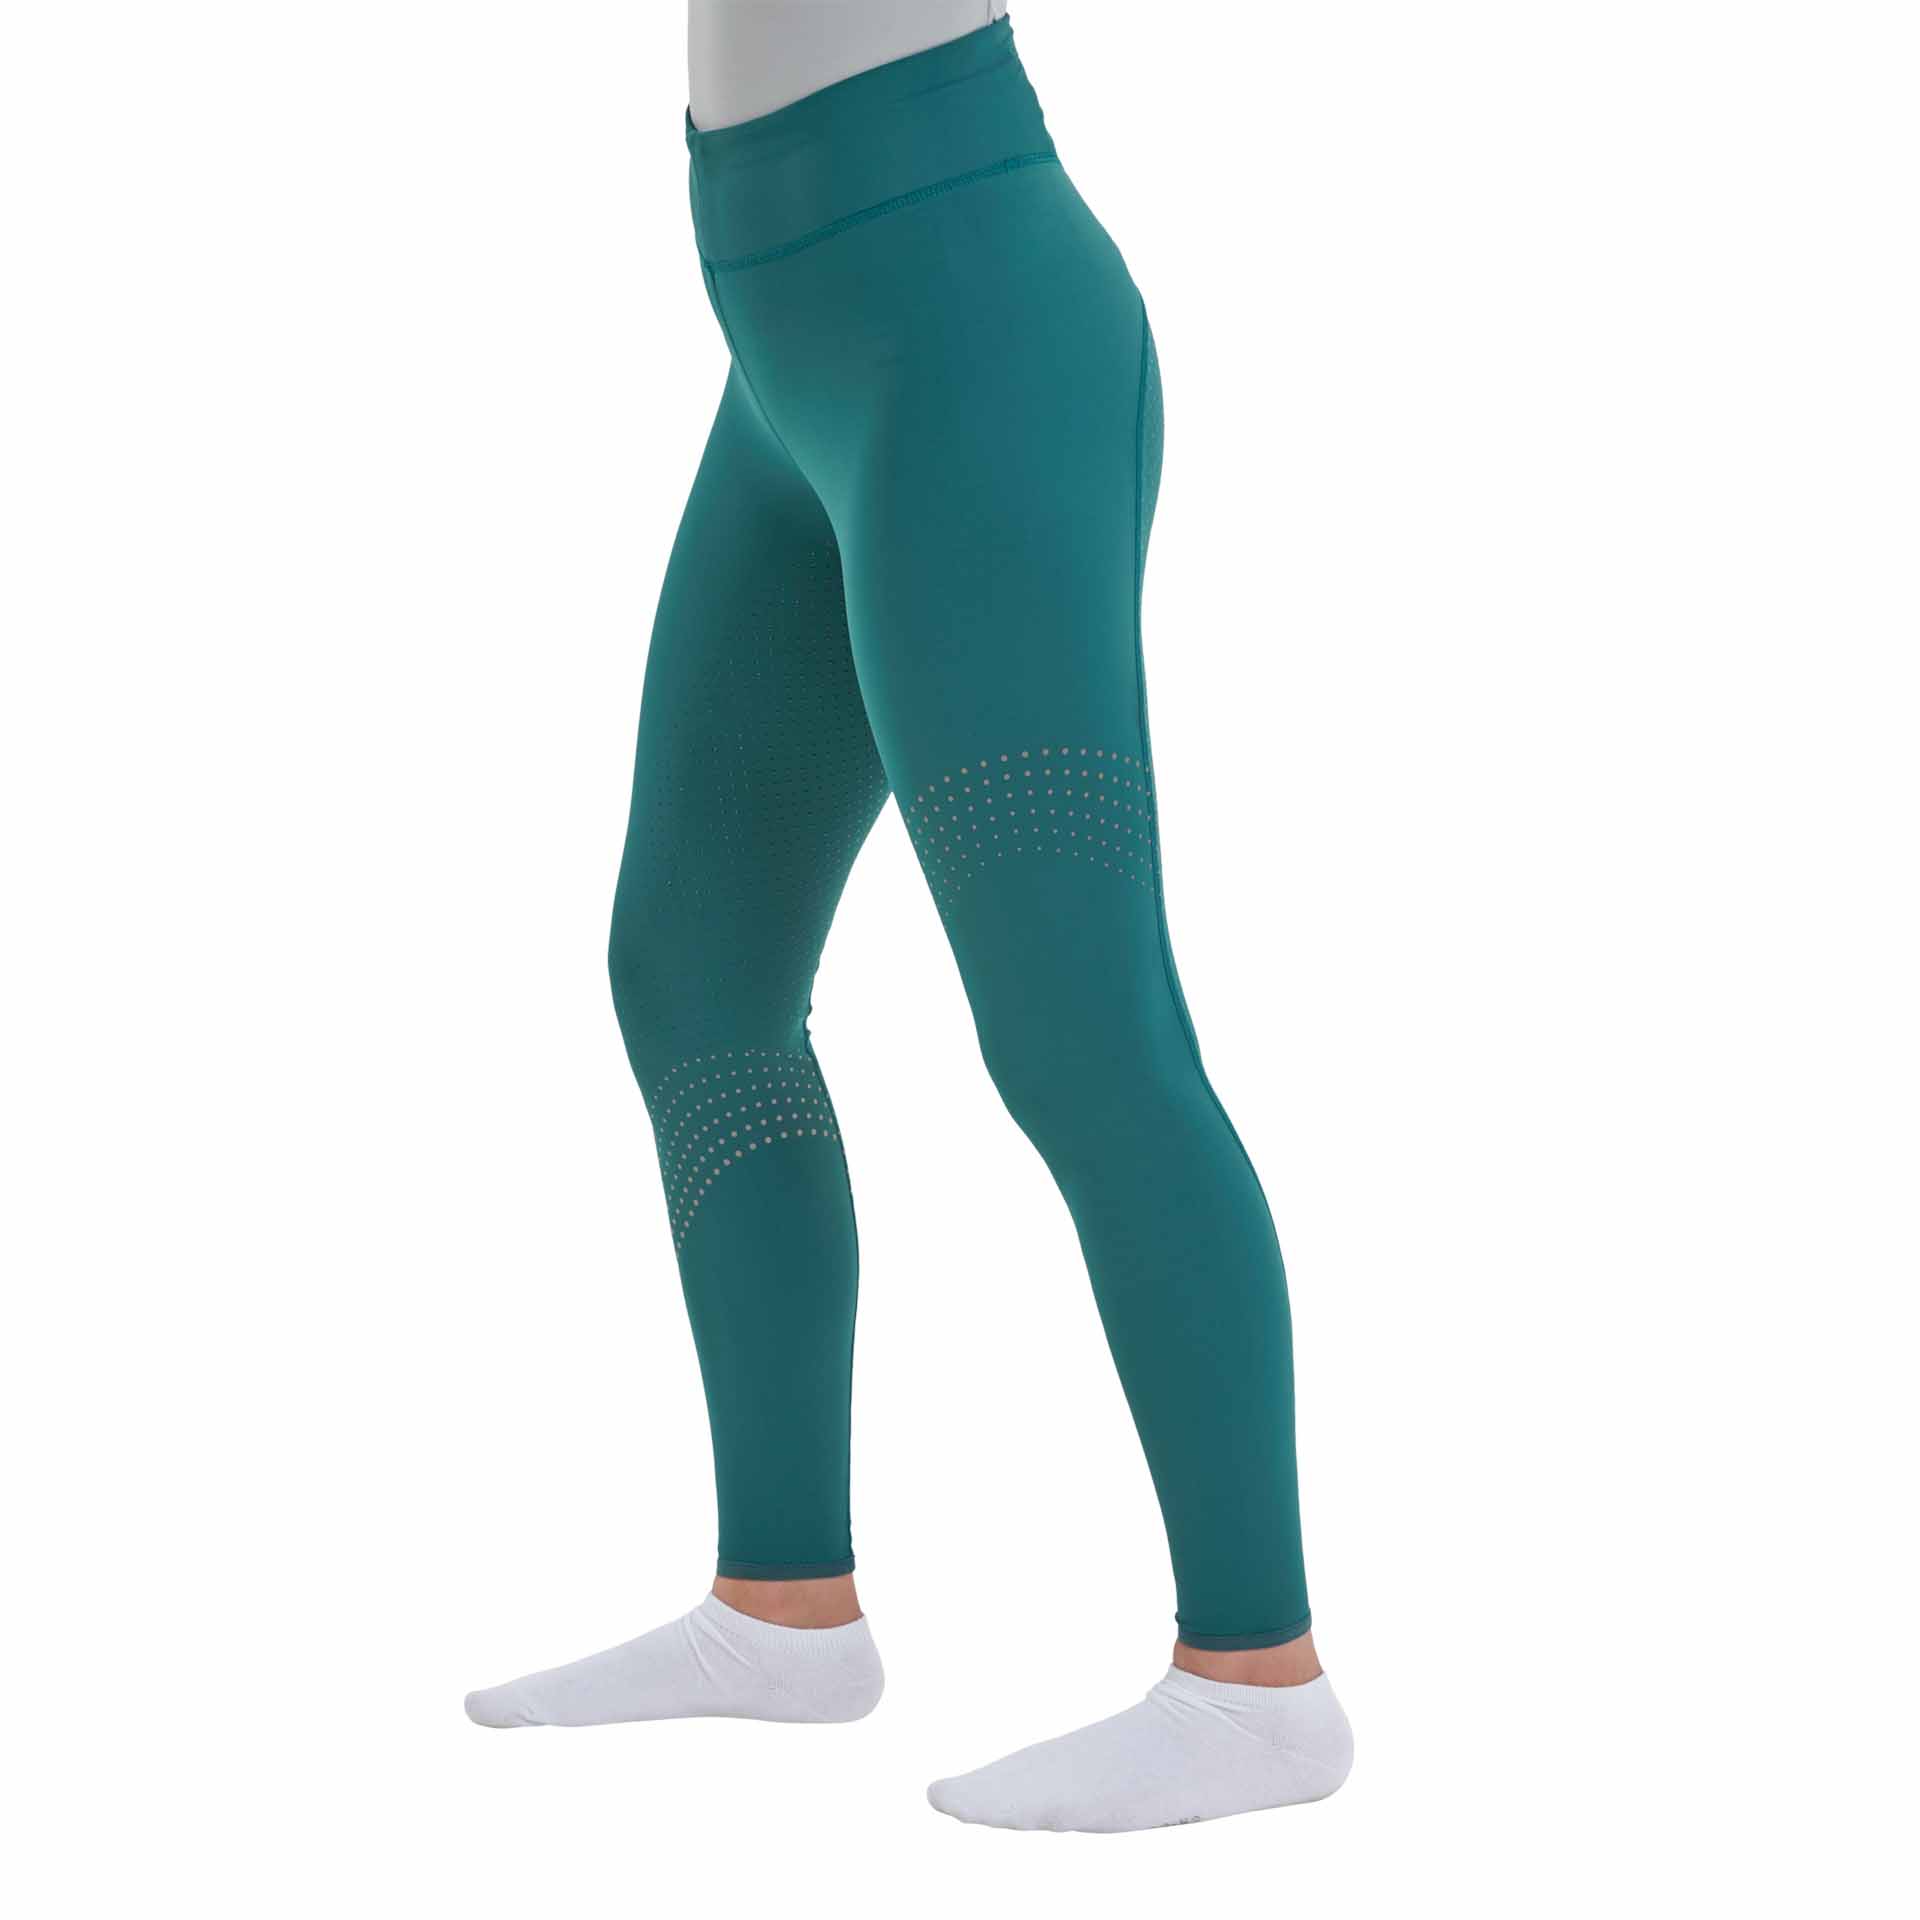 BUSSE Reit-Tights JUNE 34 teal green